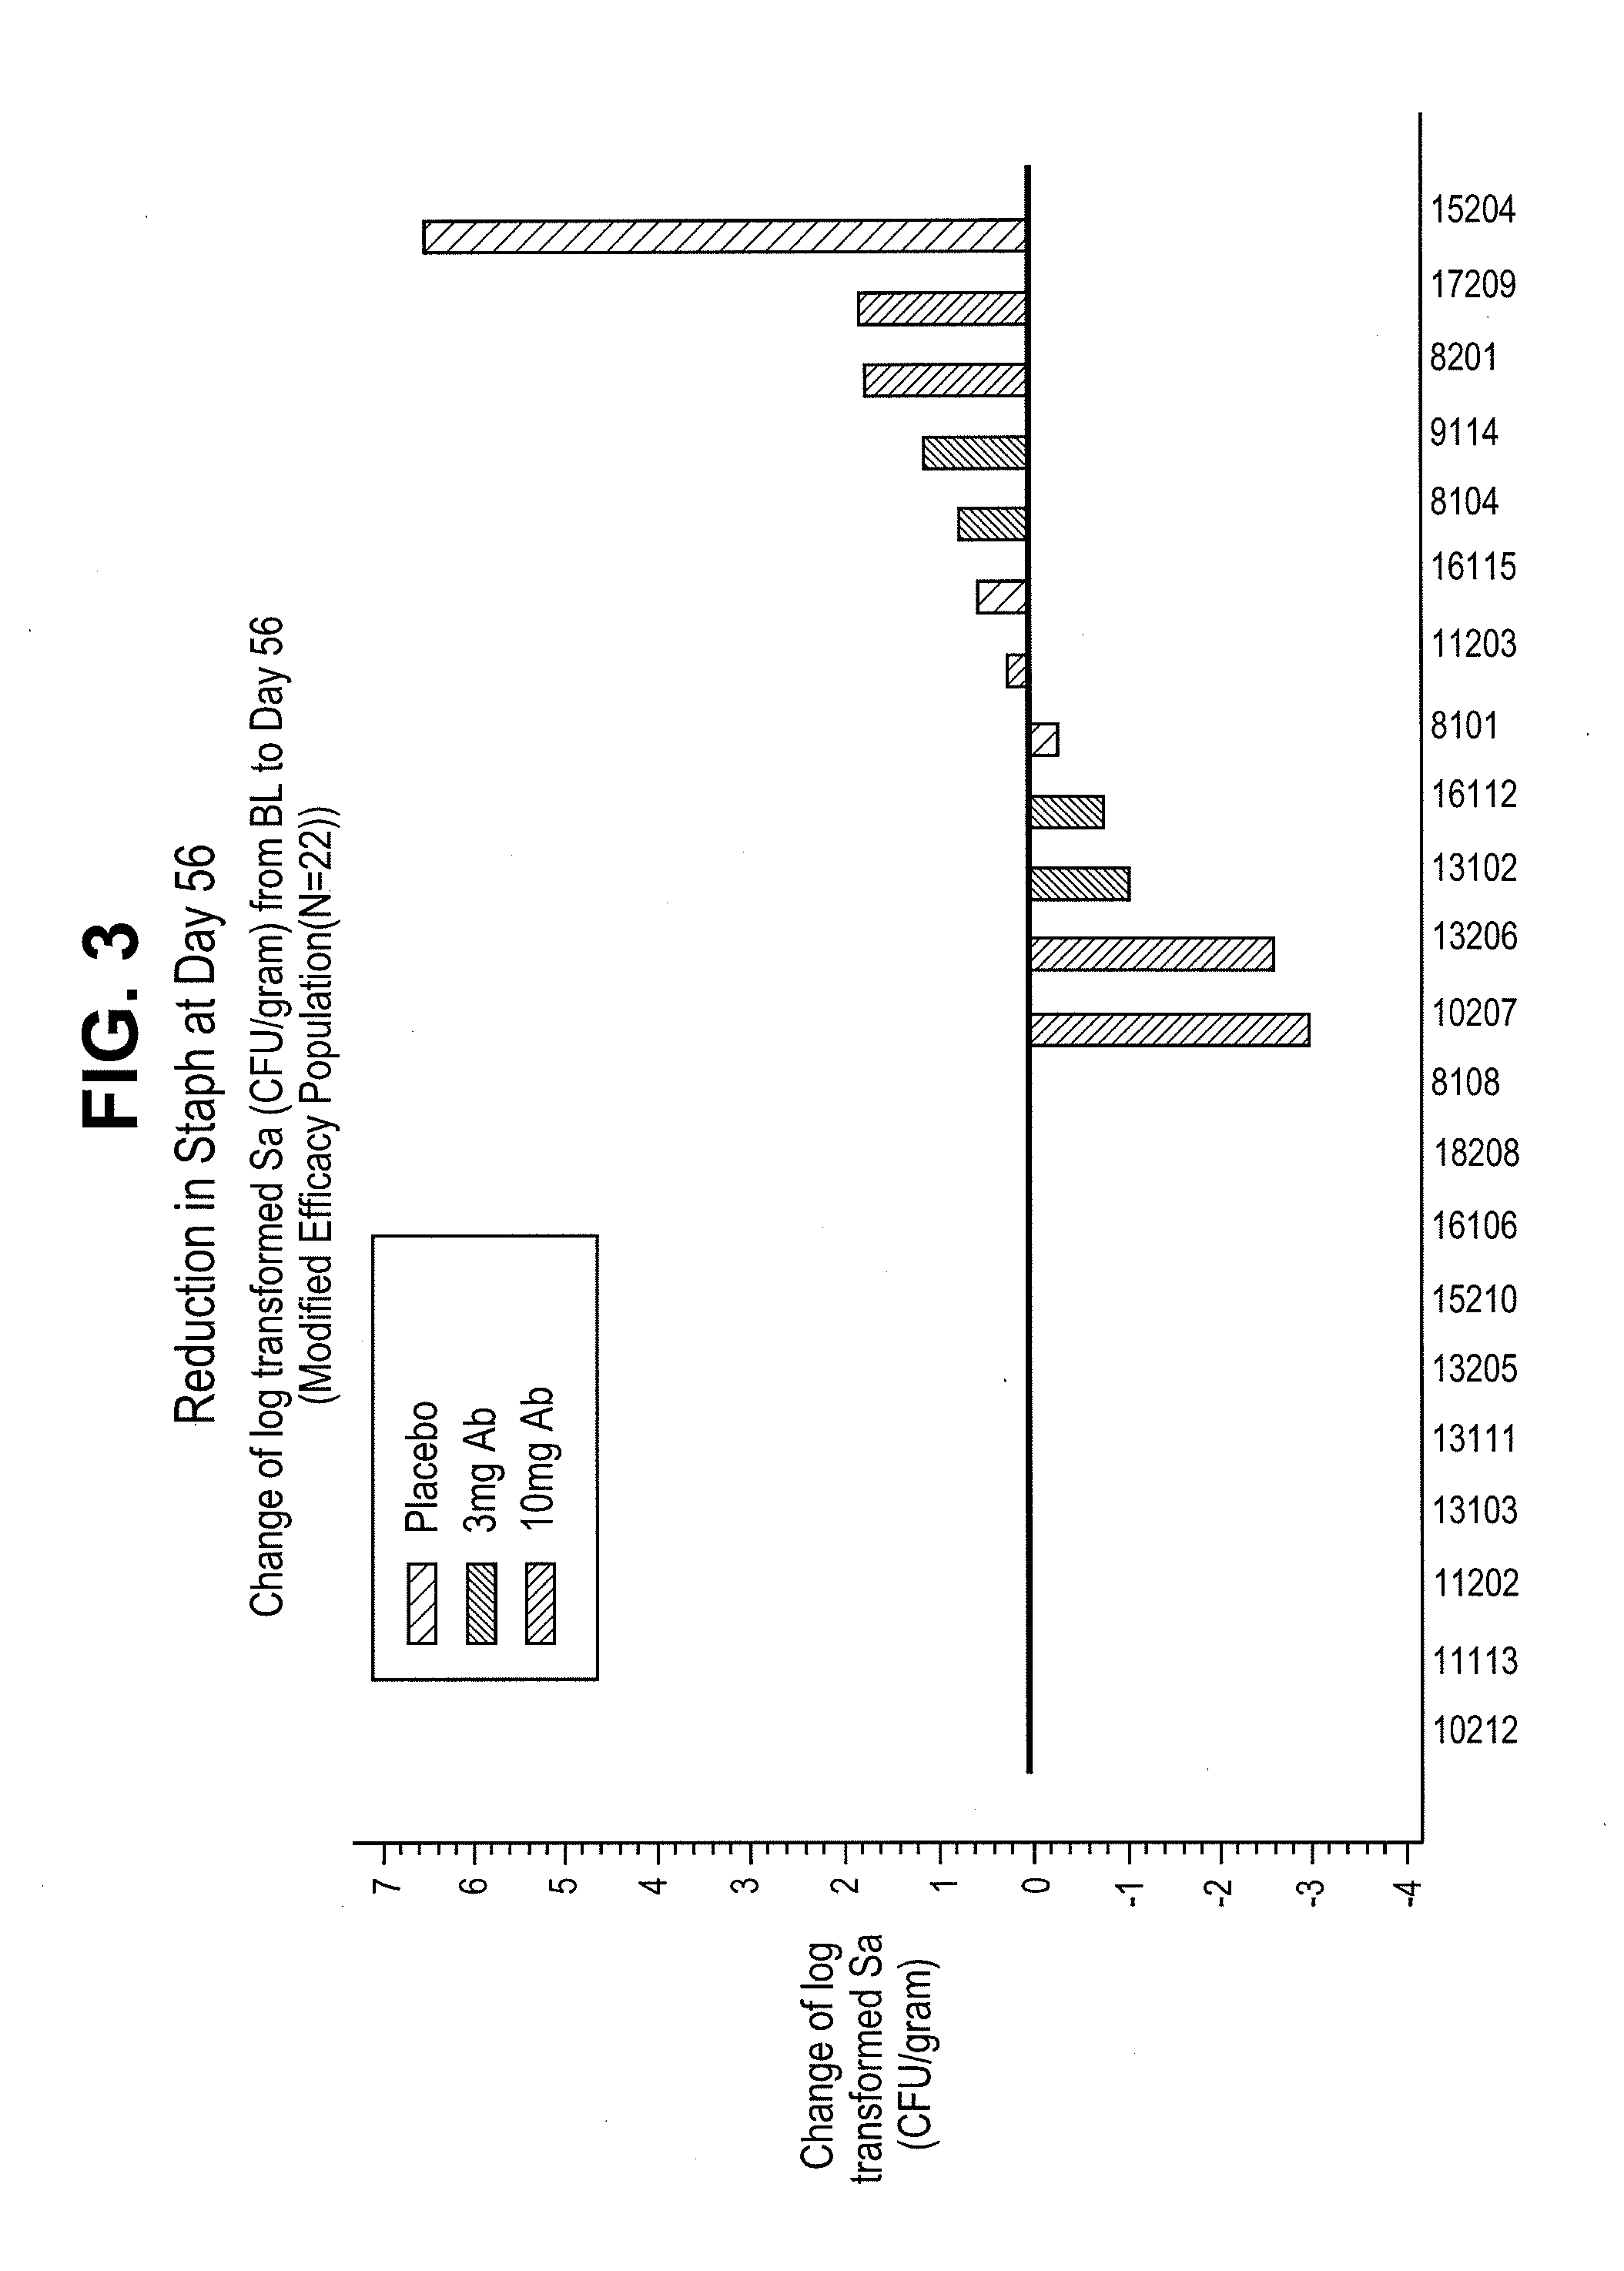 Method of treating a staphylococcus infection in a patient having a low-level pathogenic pseudomonas aeruginosa infection